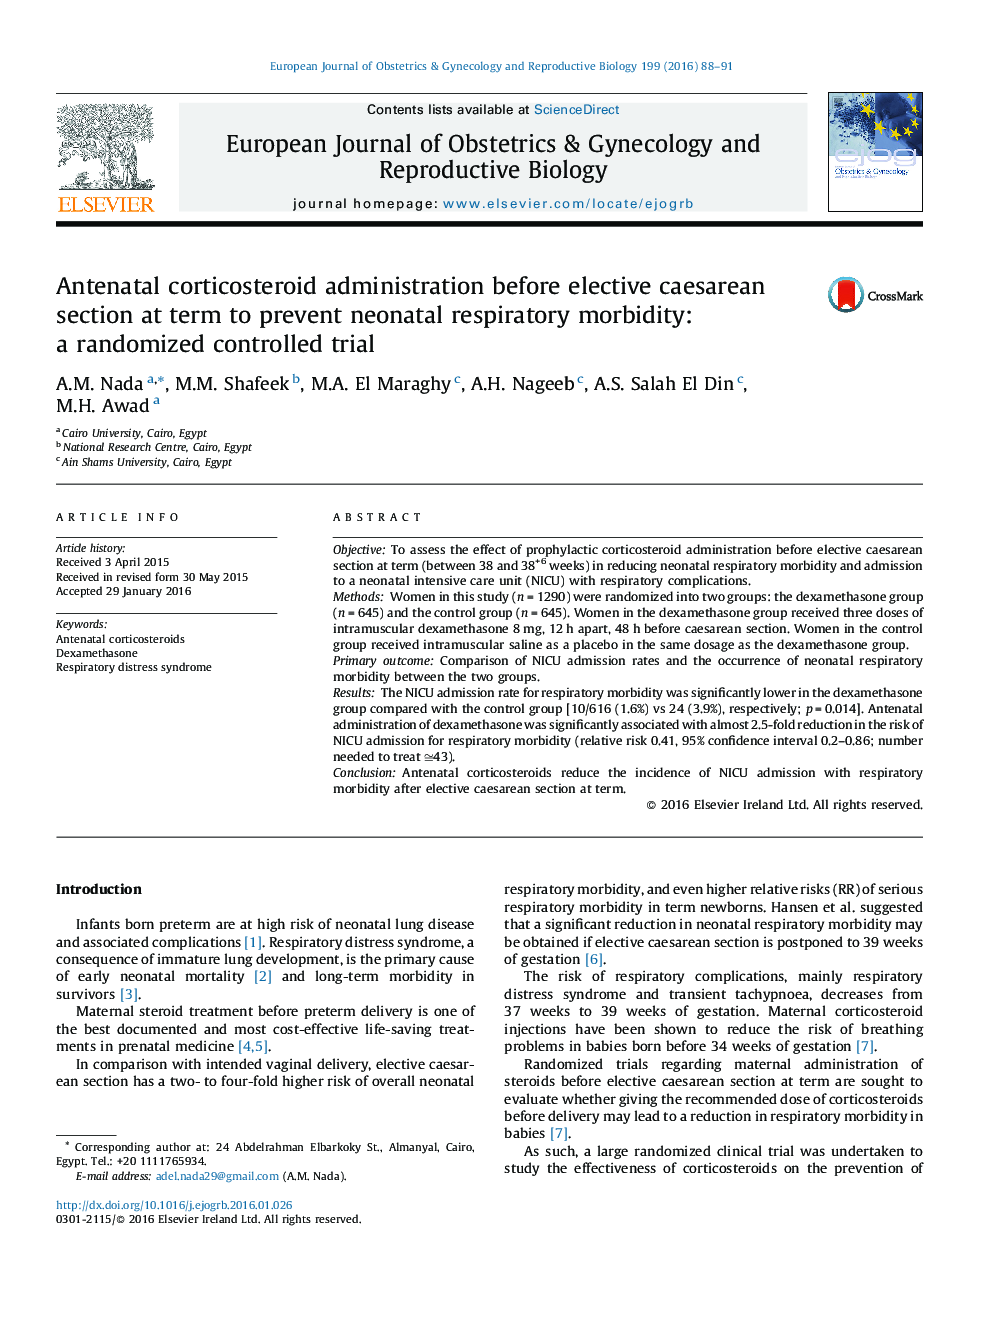 Antenatal corticosteroid administration before elective caesarean section at term to prevent neonatal respiratory morbidity: a randomized controlled trial